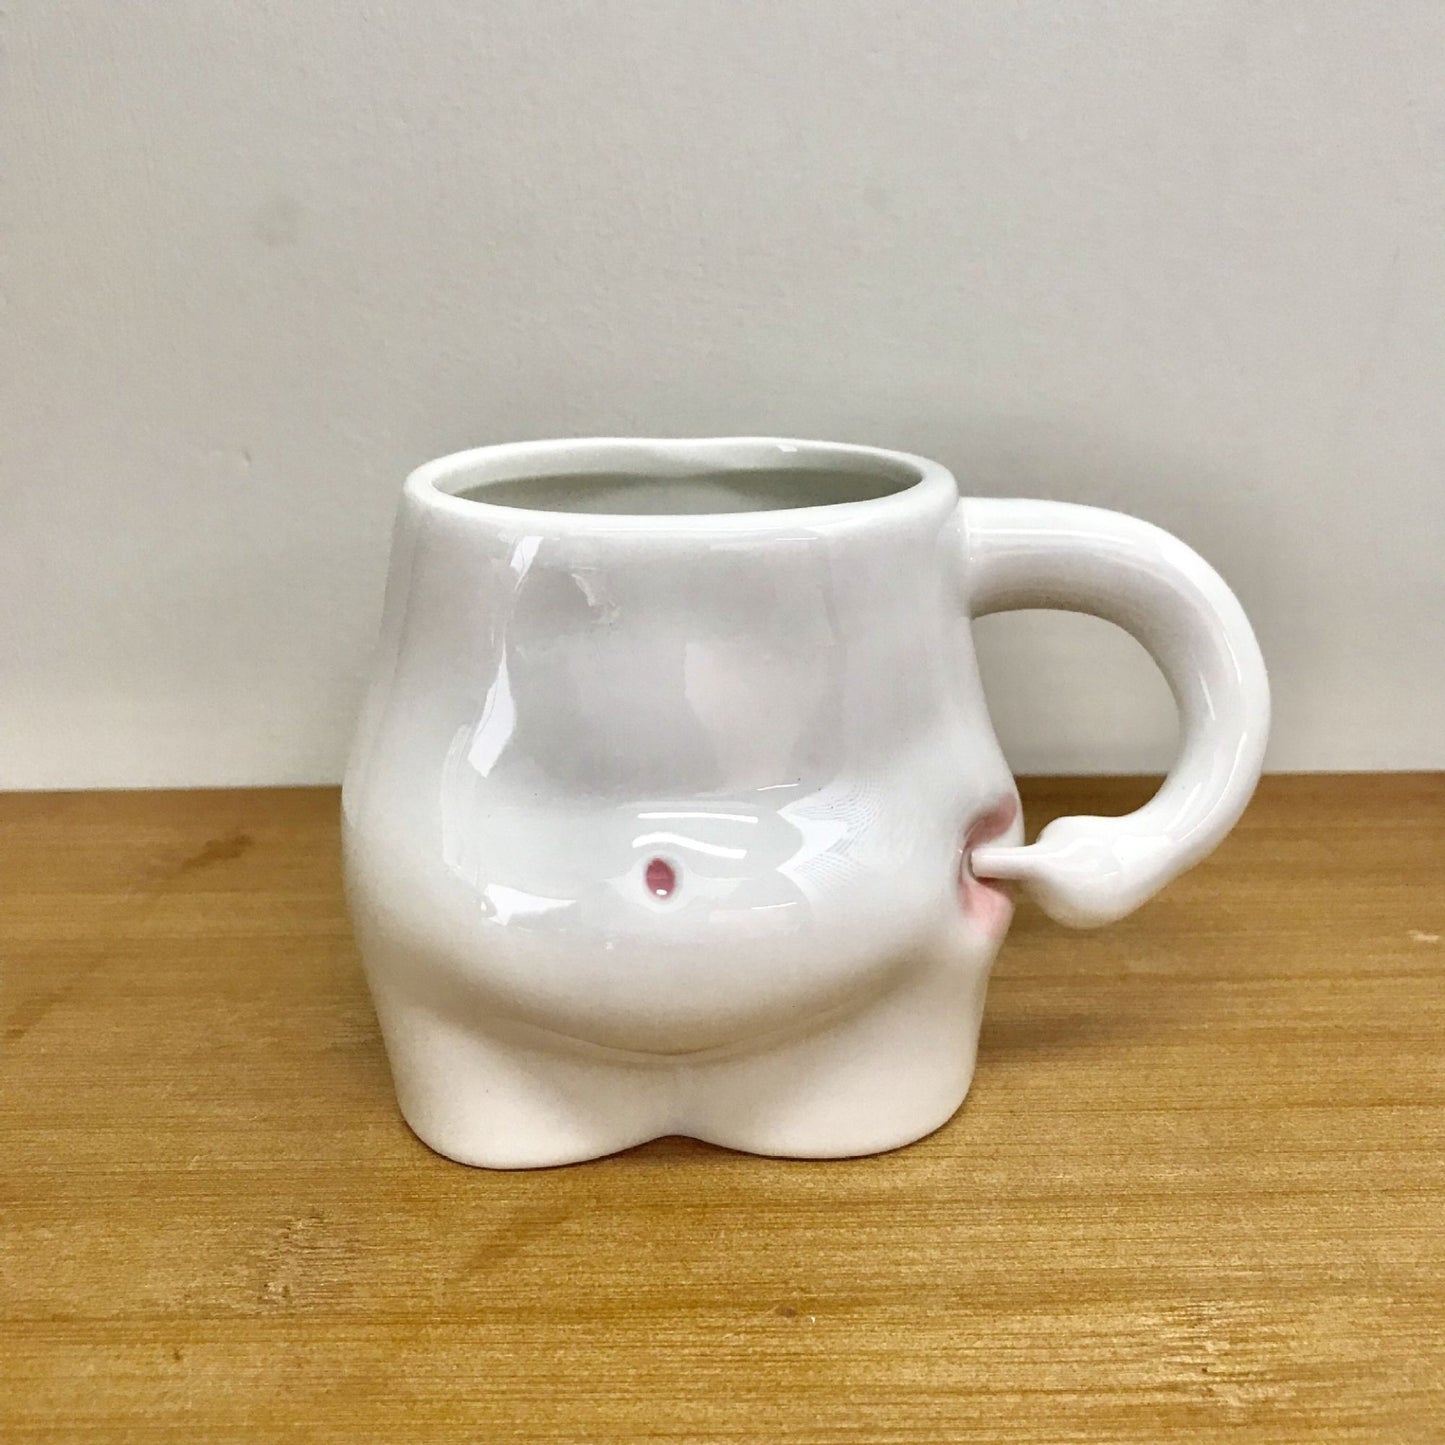 Small ceramic coffee cup, chubby belly mug, funny gift - 10.8 oz (32 cl)